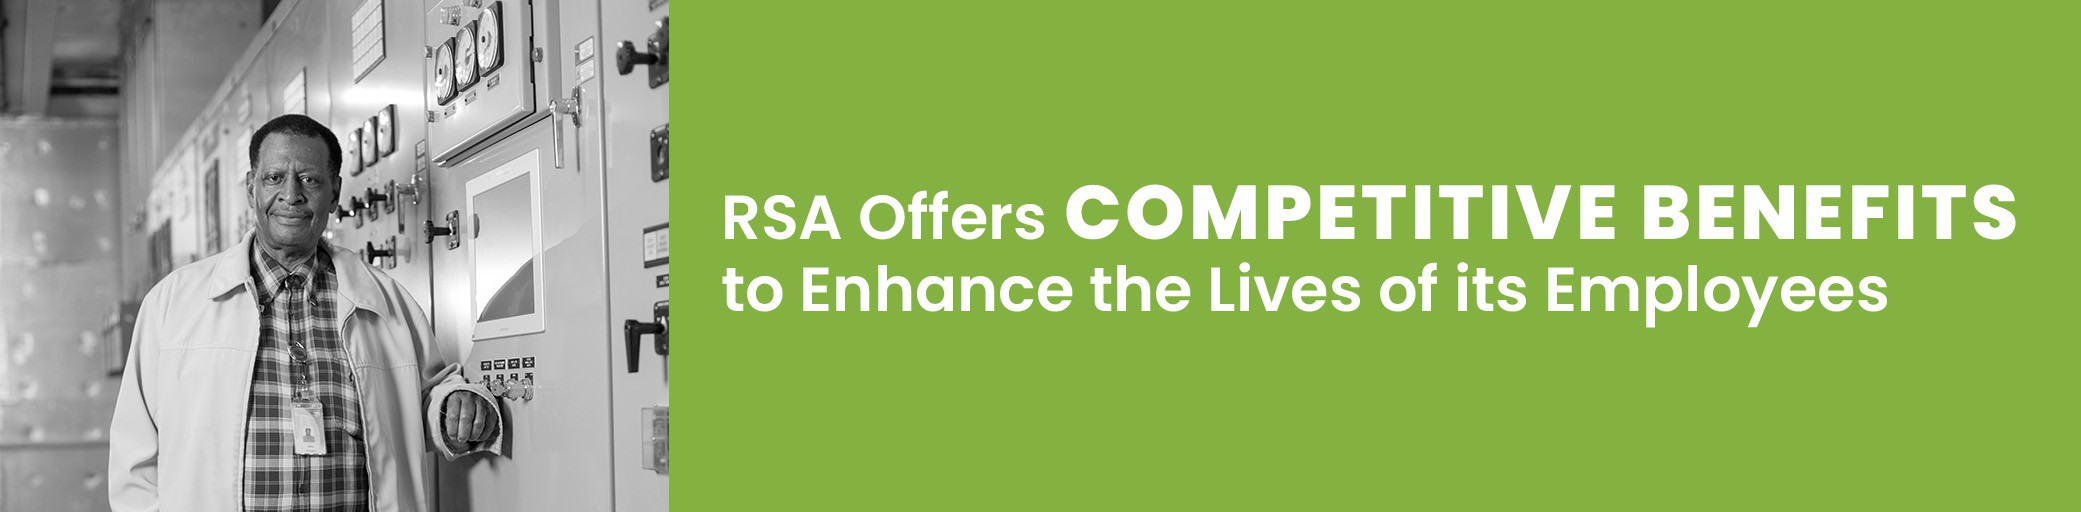 RSA offers competitive benefits to enhance the lives of its employees